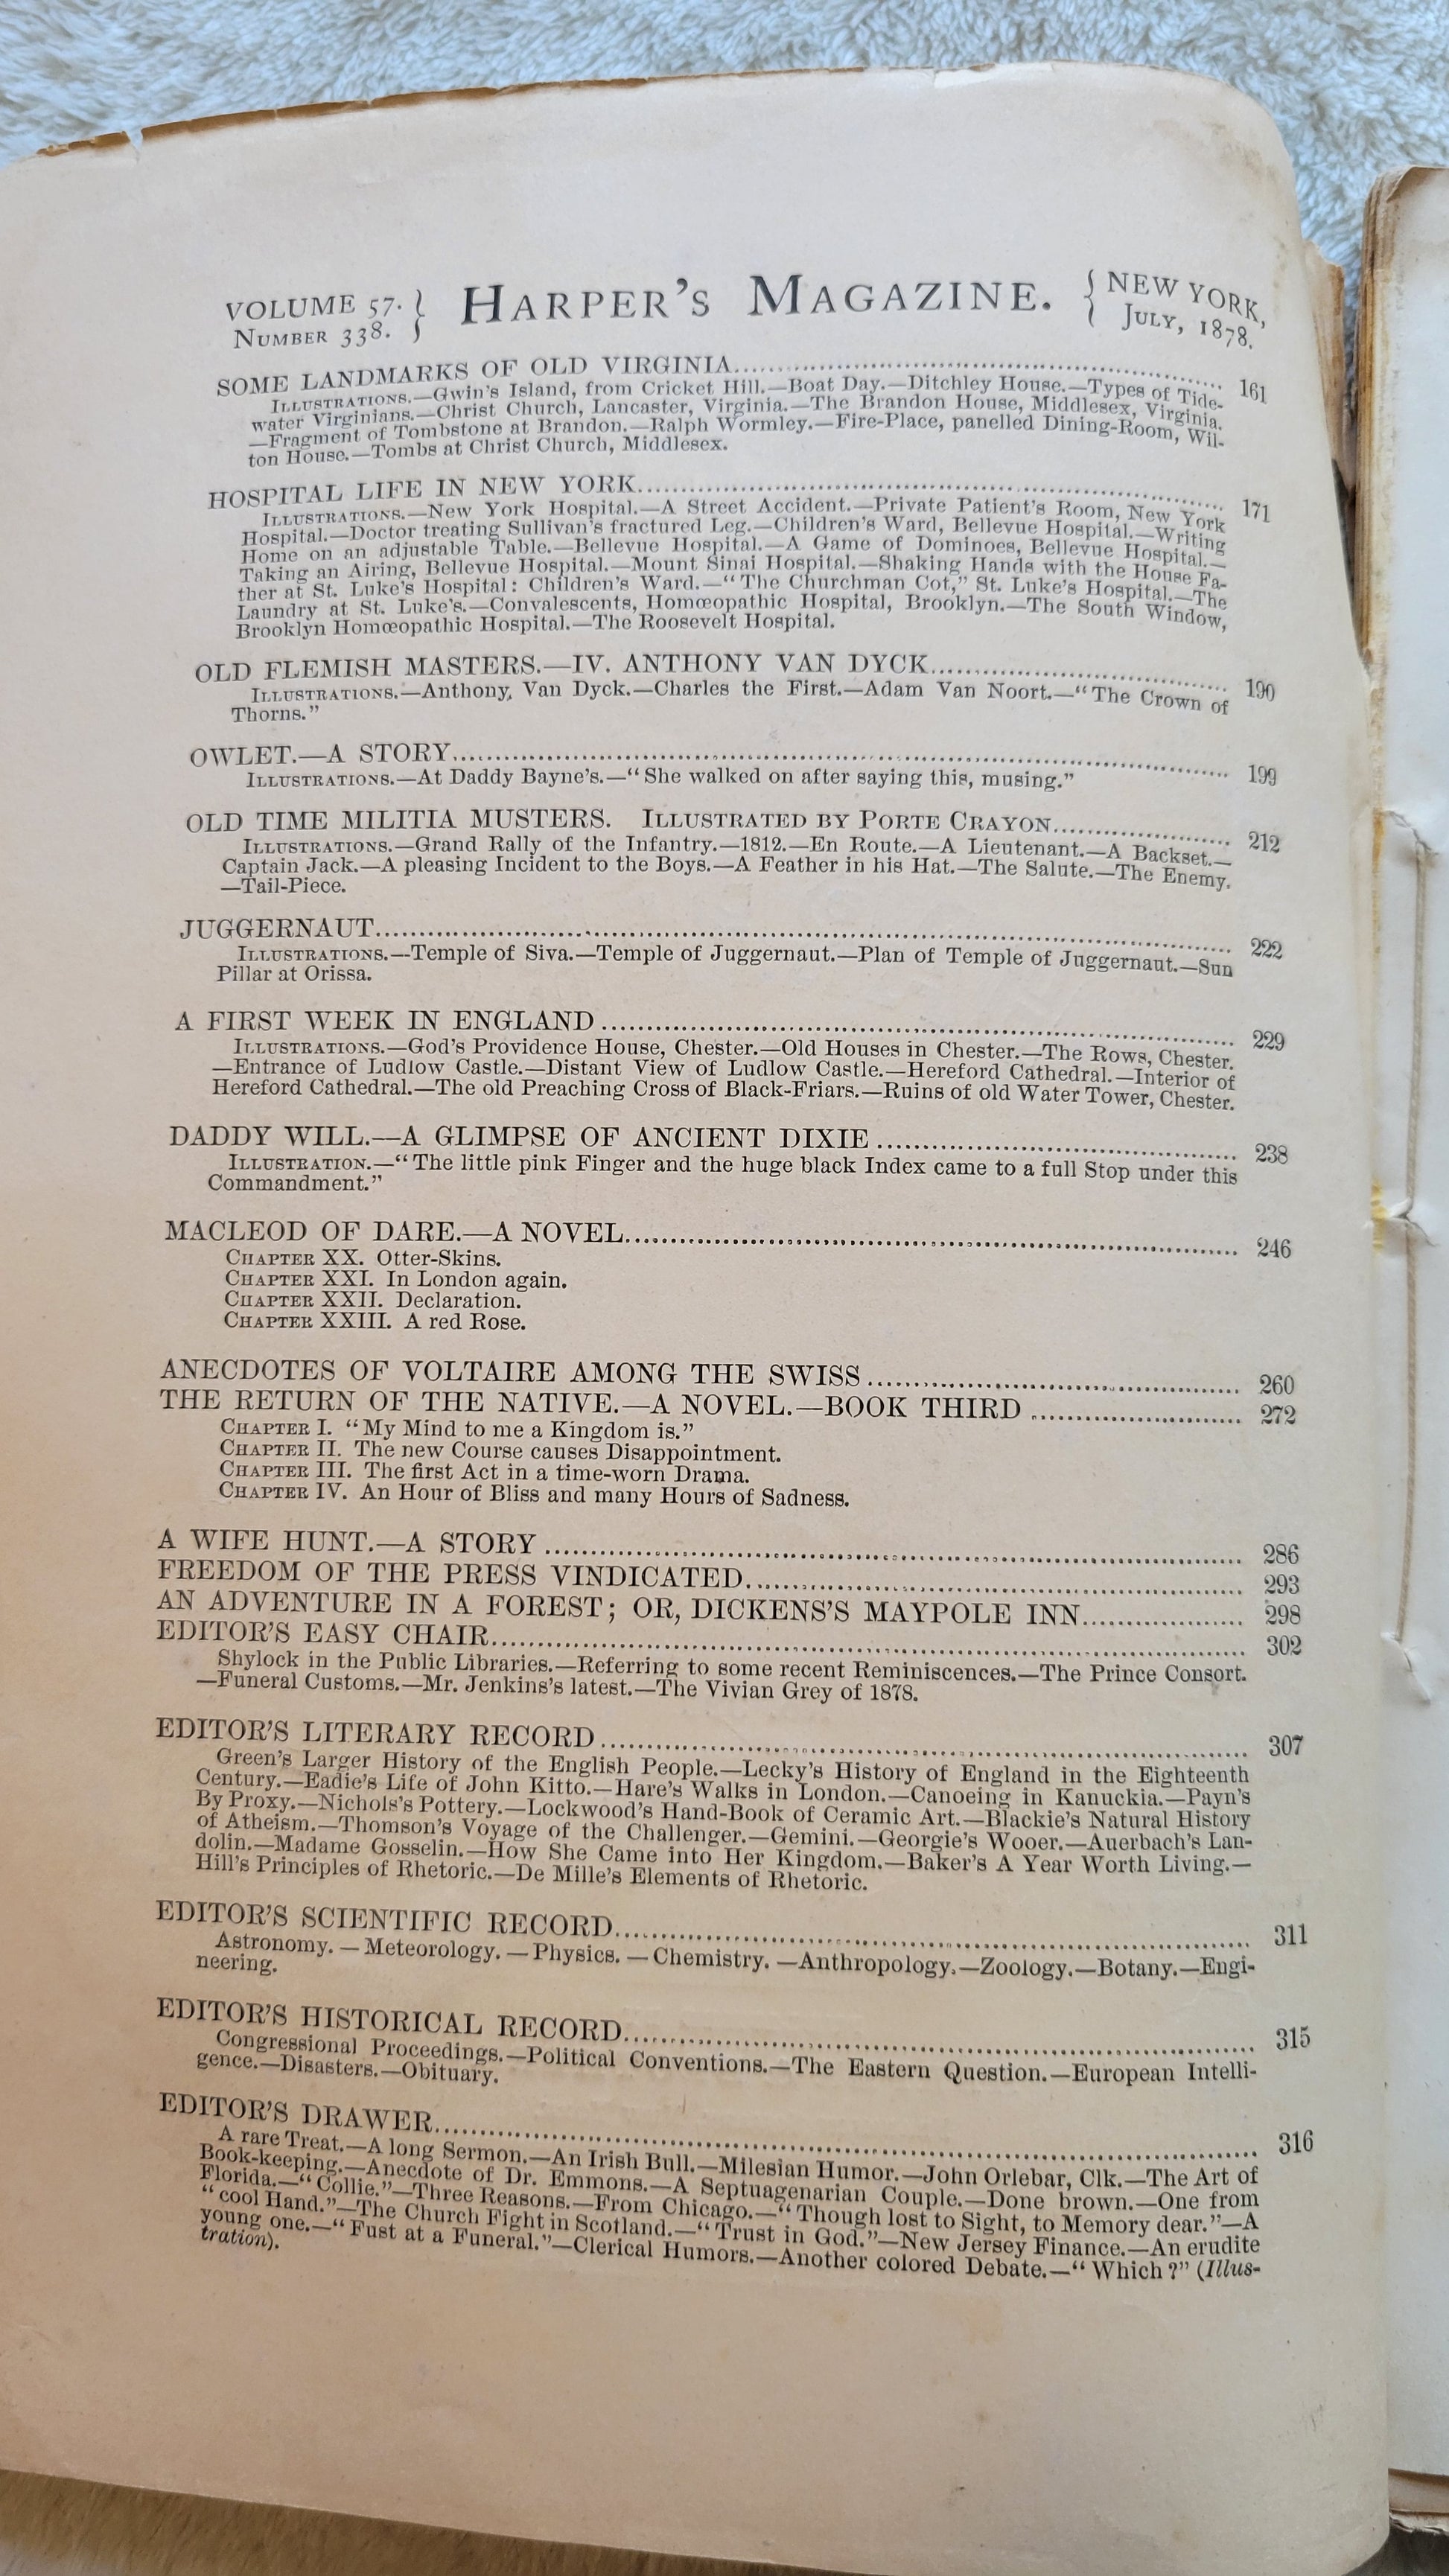 Antique magazine for sale, Volume 57 Number 338, July 1878 of Harper's New Monthly Magazine, published by Harper & Brothers, Franklin Square, New York. View of table of contents.